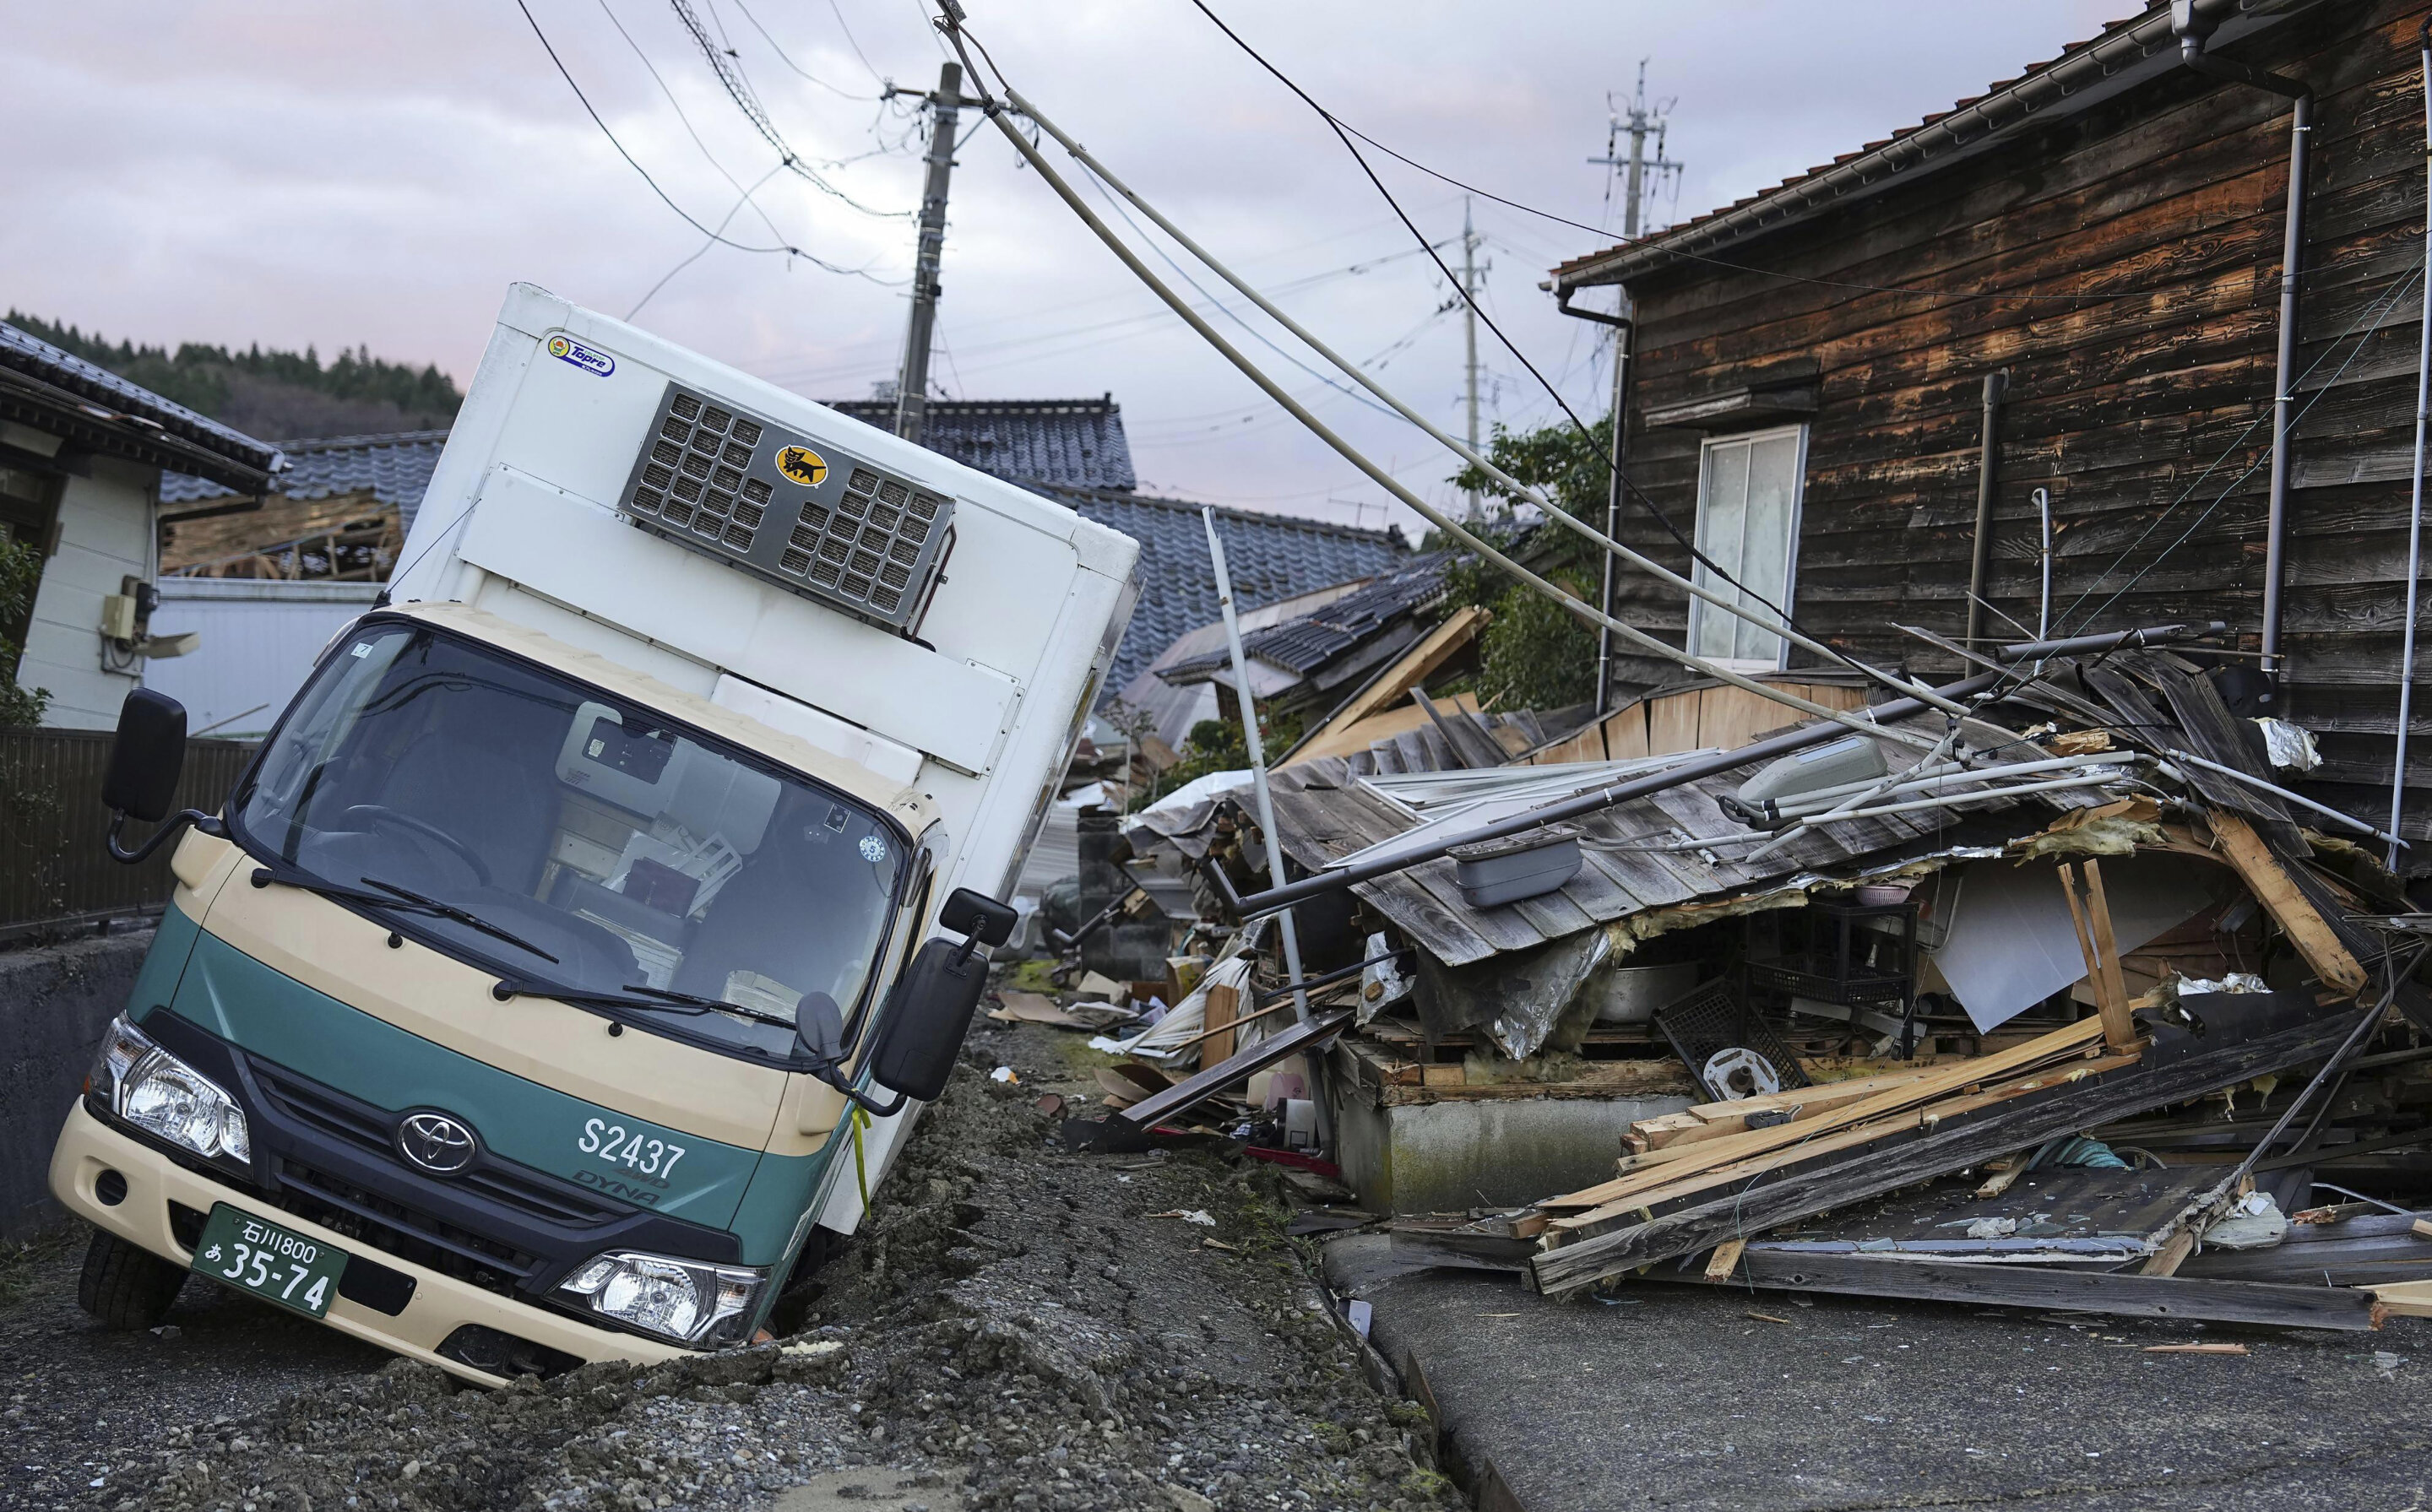 #Scenes of loss play out across Japan’s western coastline after quake kills 92, dozens still missing